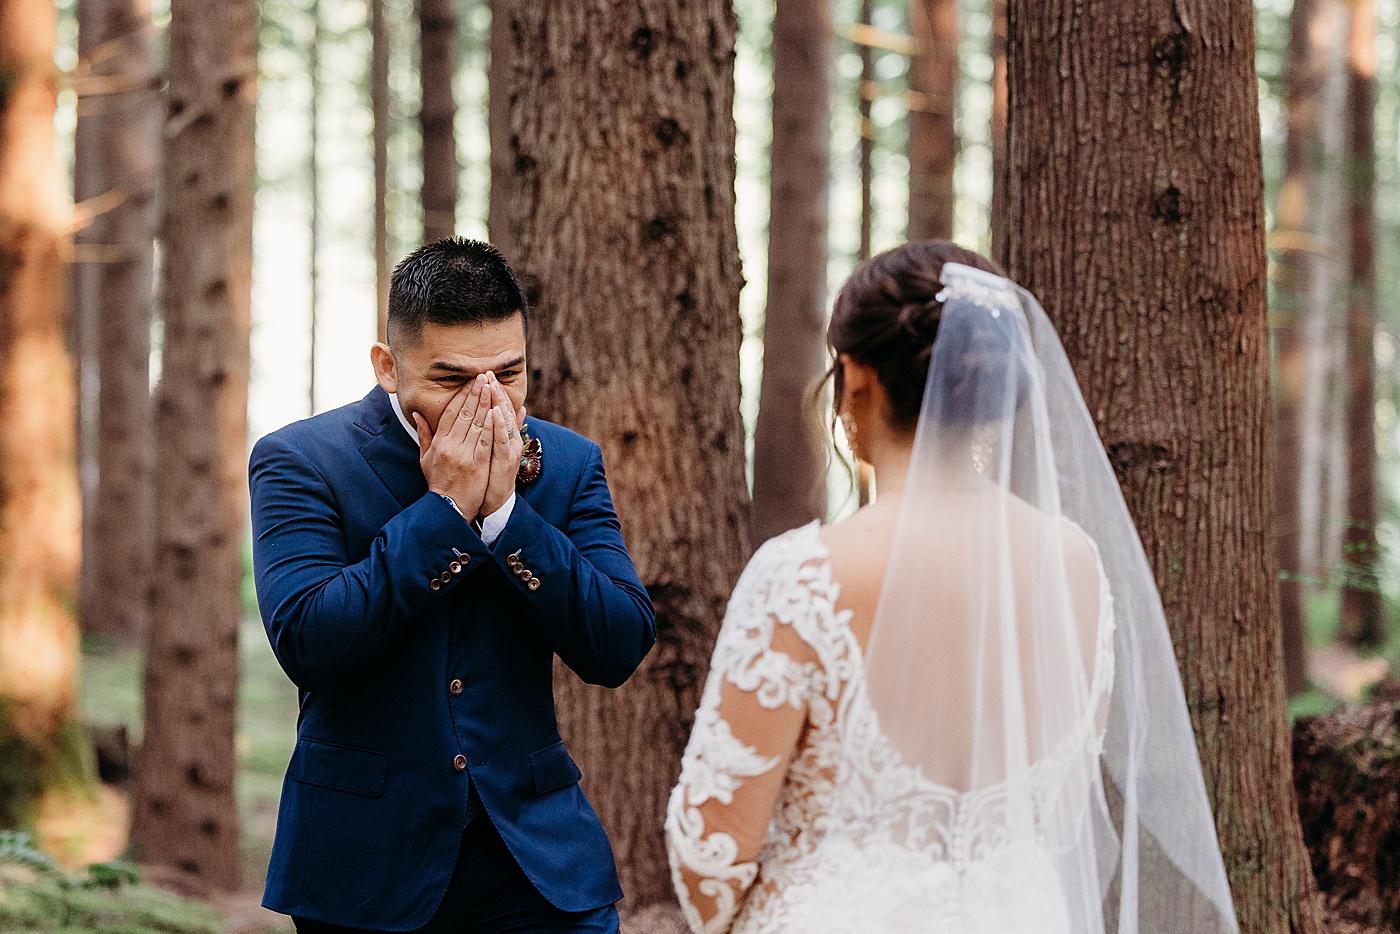 Bride and groom first look at Emerald Forest Treehouse | Photo by Megan Montalvo Photography